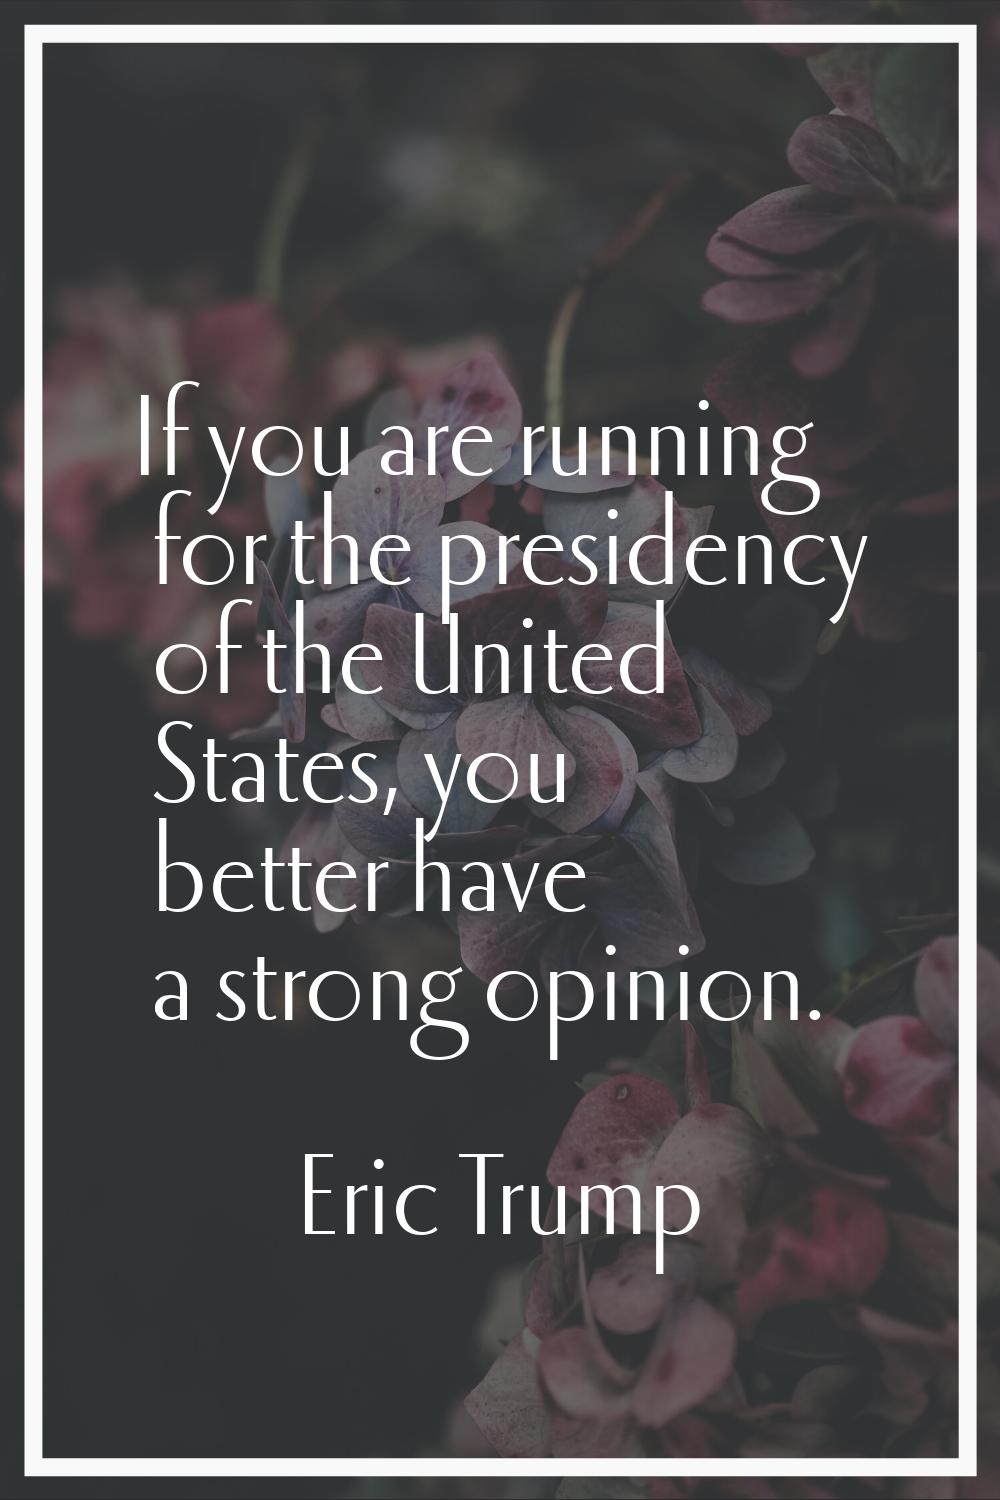 If you are running for the presidency of the United States, you better have a strong opinion.